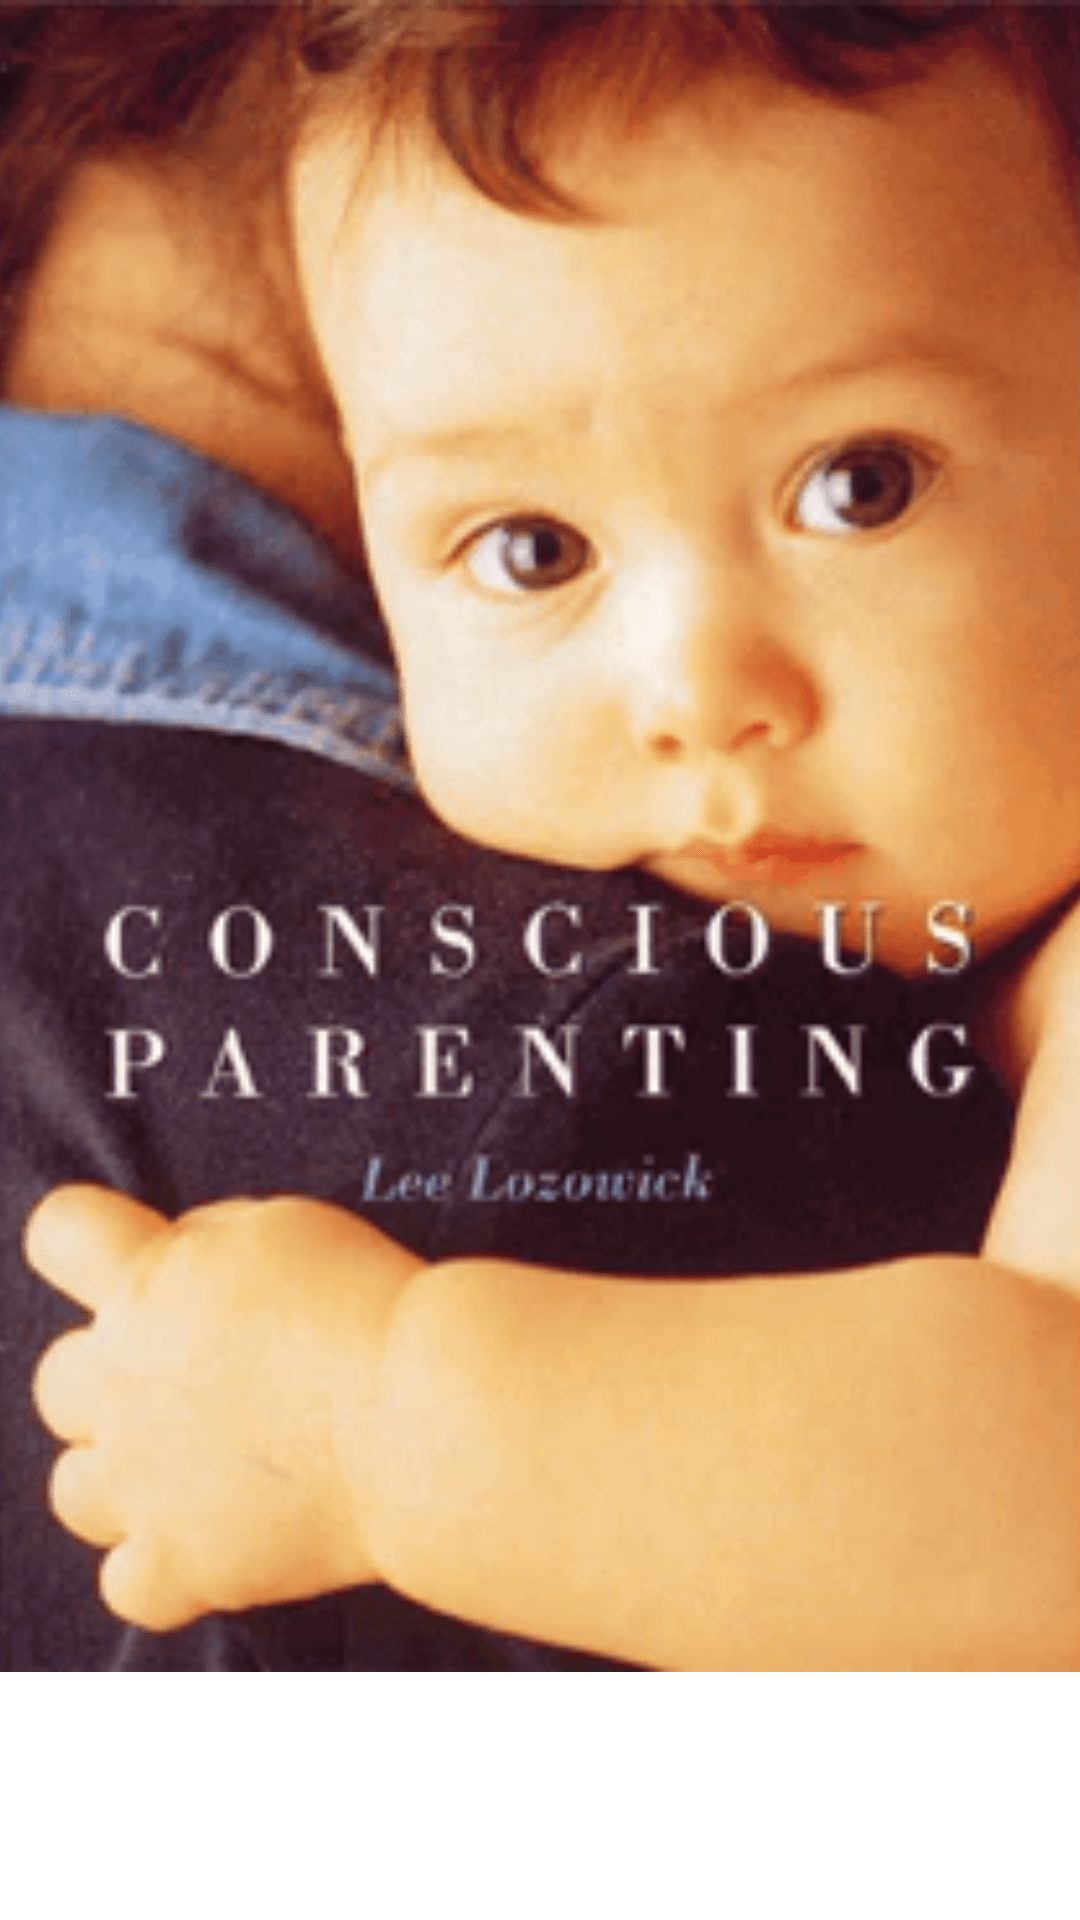 Conscious Parenting by Lee Lozowick